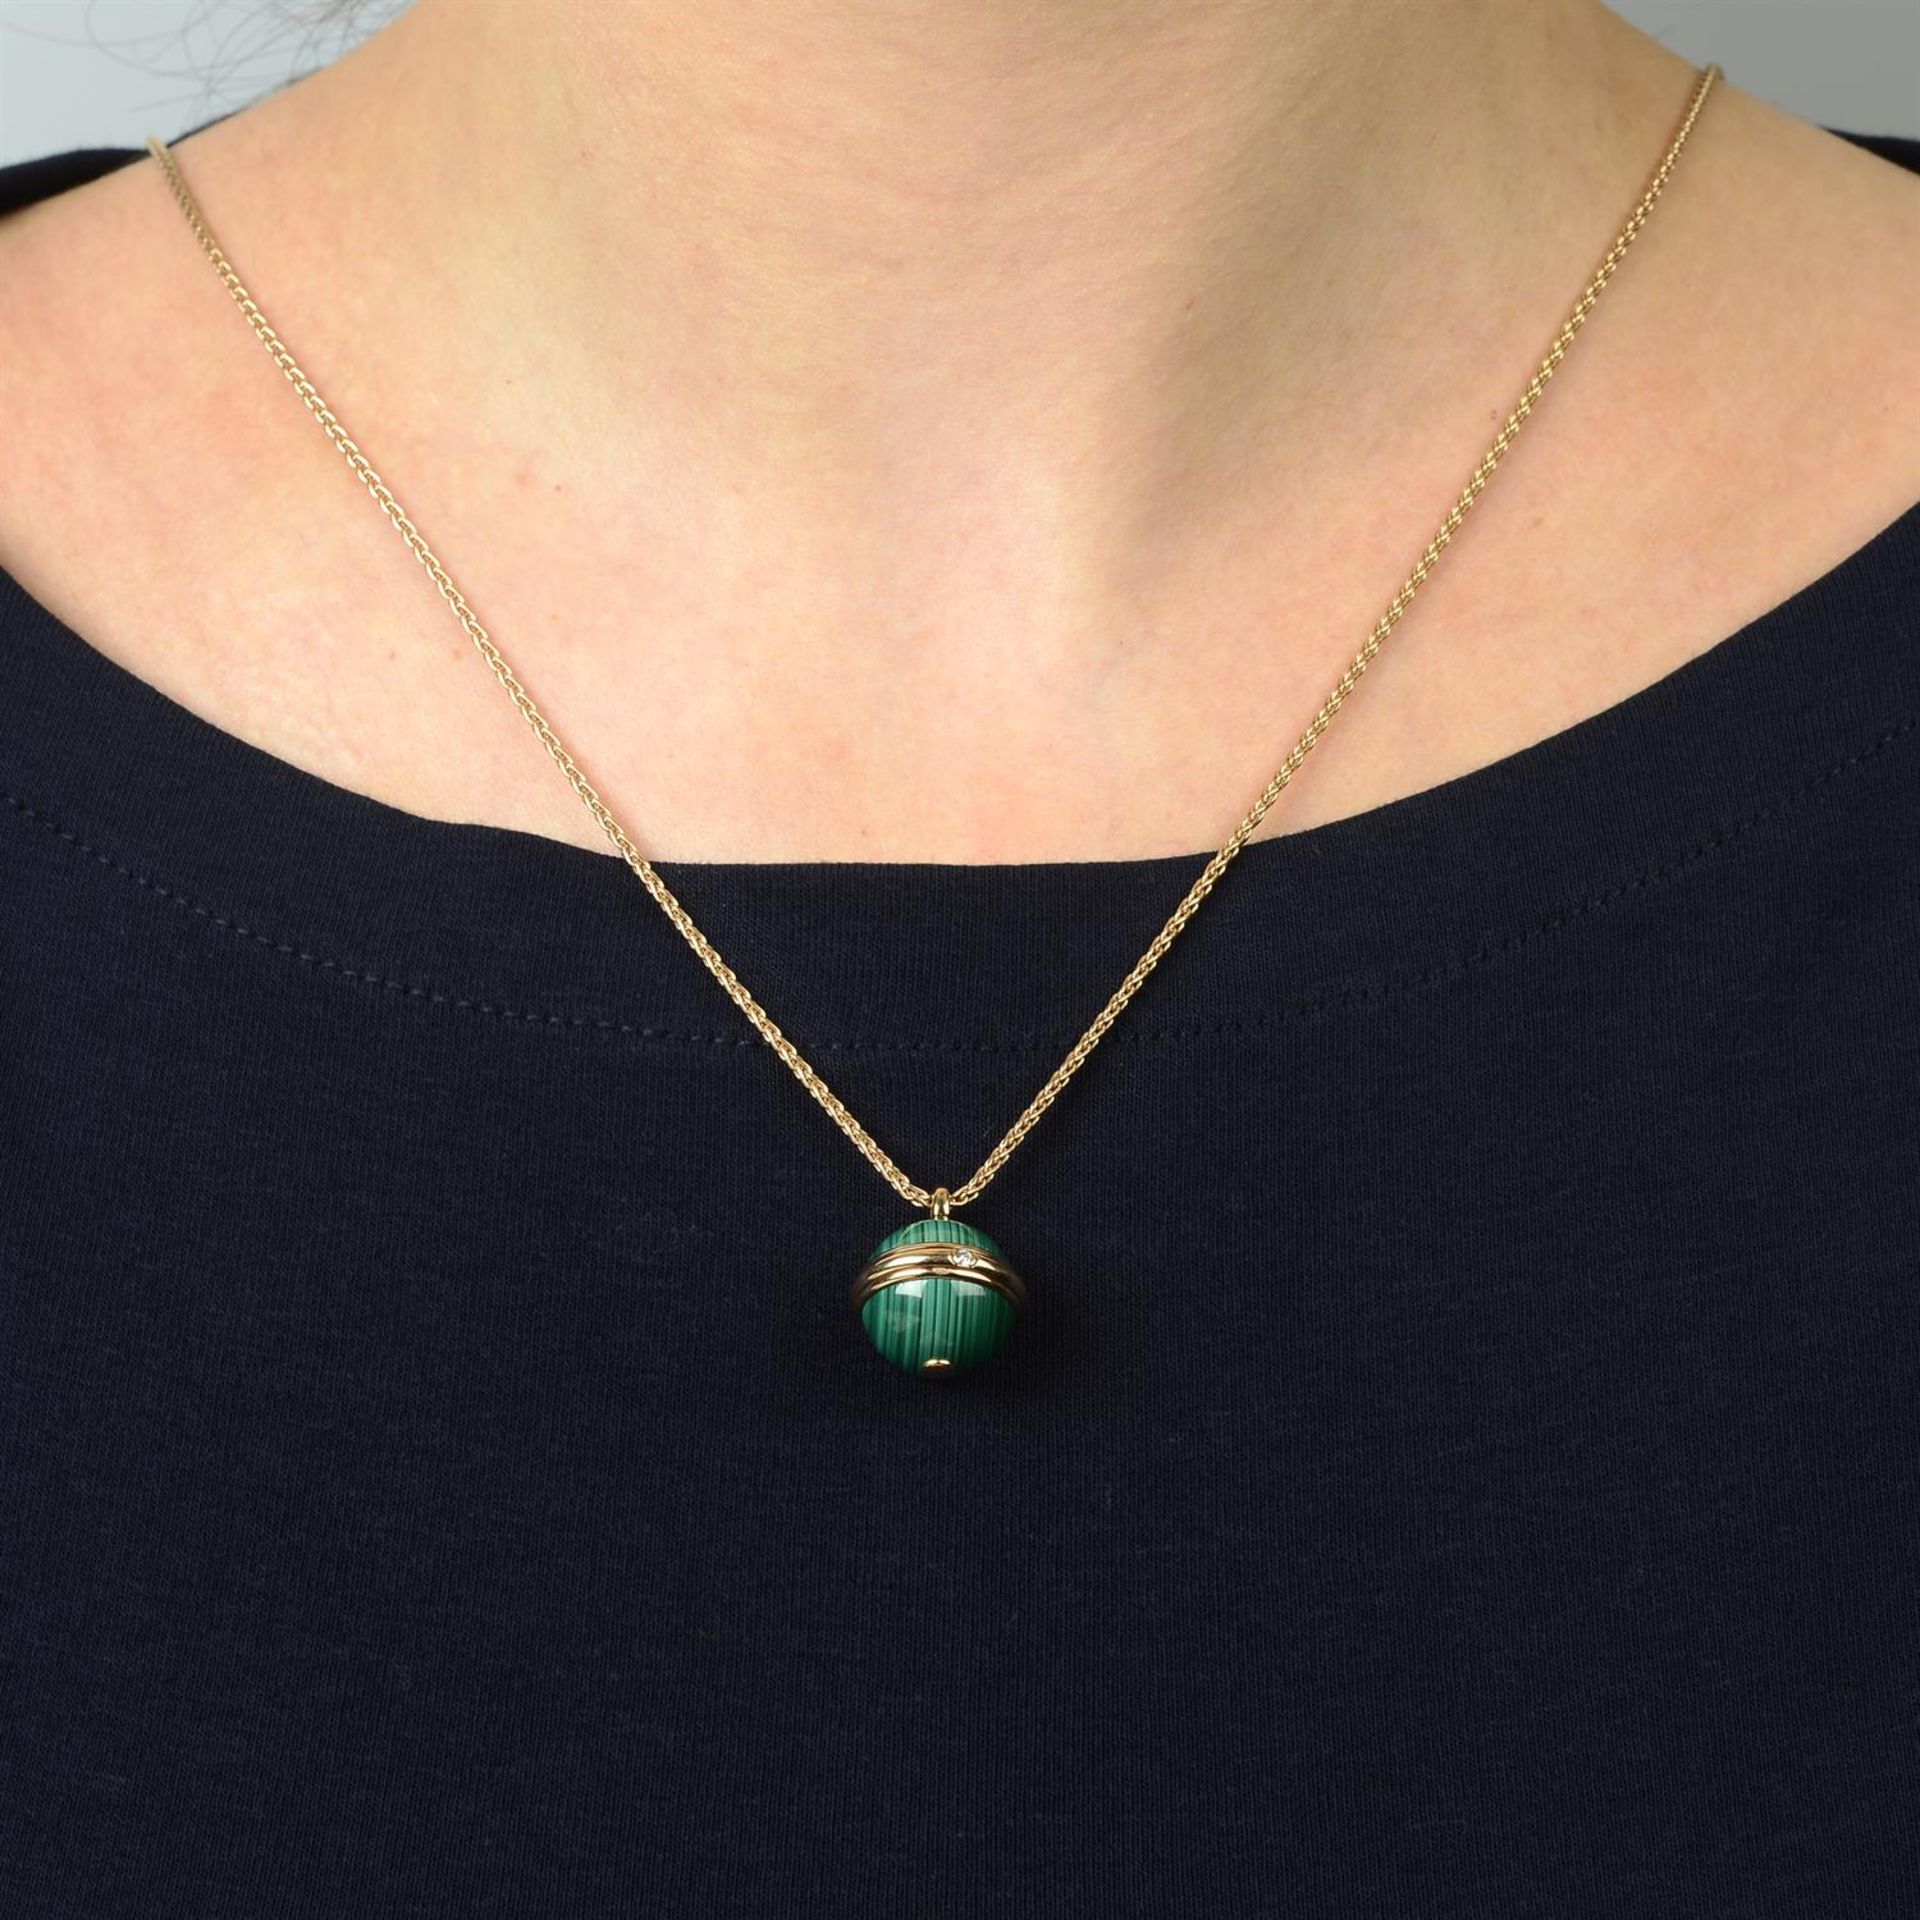 A malachite and diamond 'Posession' pendant, on chain, by Piaget. - Image 6 of 6